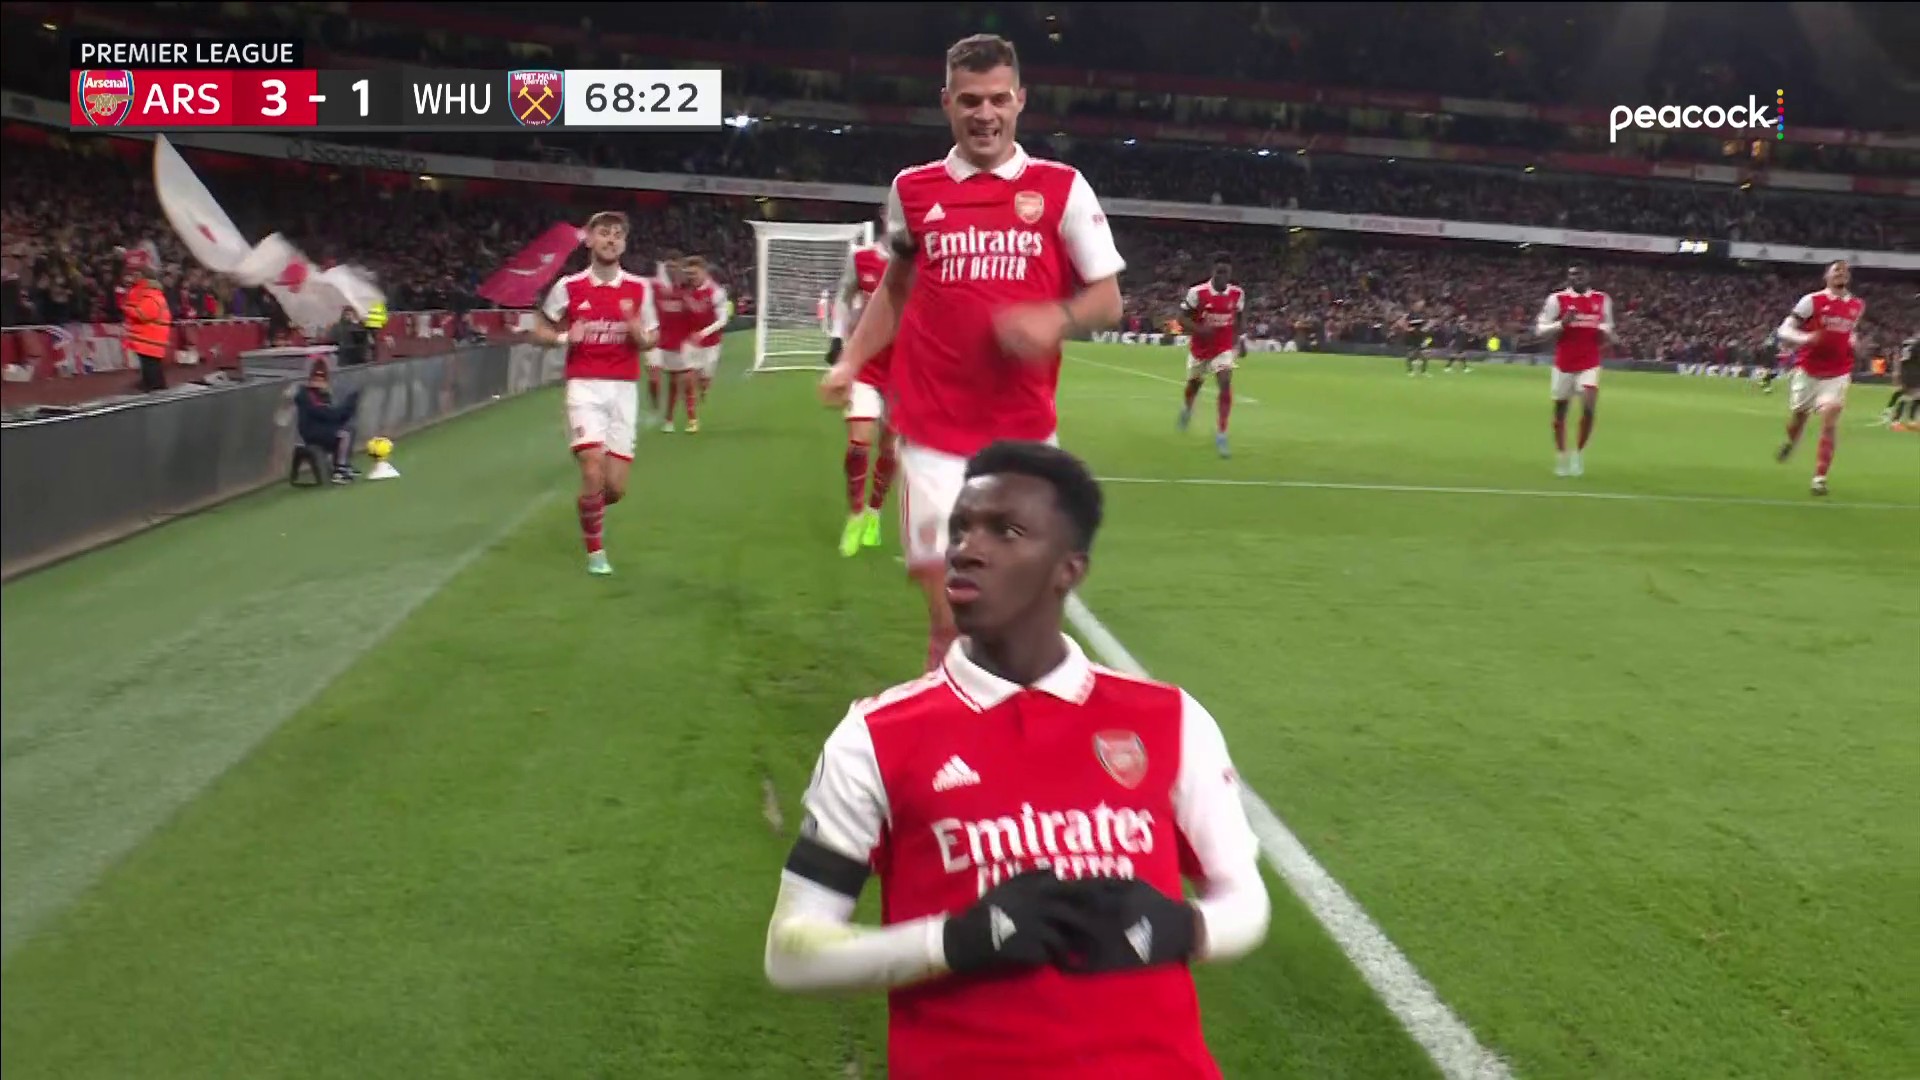 First Premier League start of the season ✅

First Premier League goal of the season ✅

Eddie Nketiah doing just fine replacing the injured Gabriel Jesus in Arsenal's XI. 💫

🎥: @NBCSportsSoccer